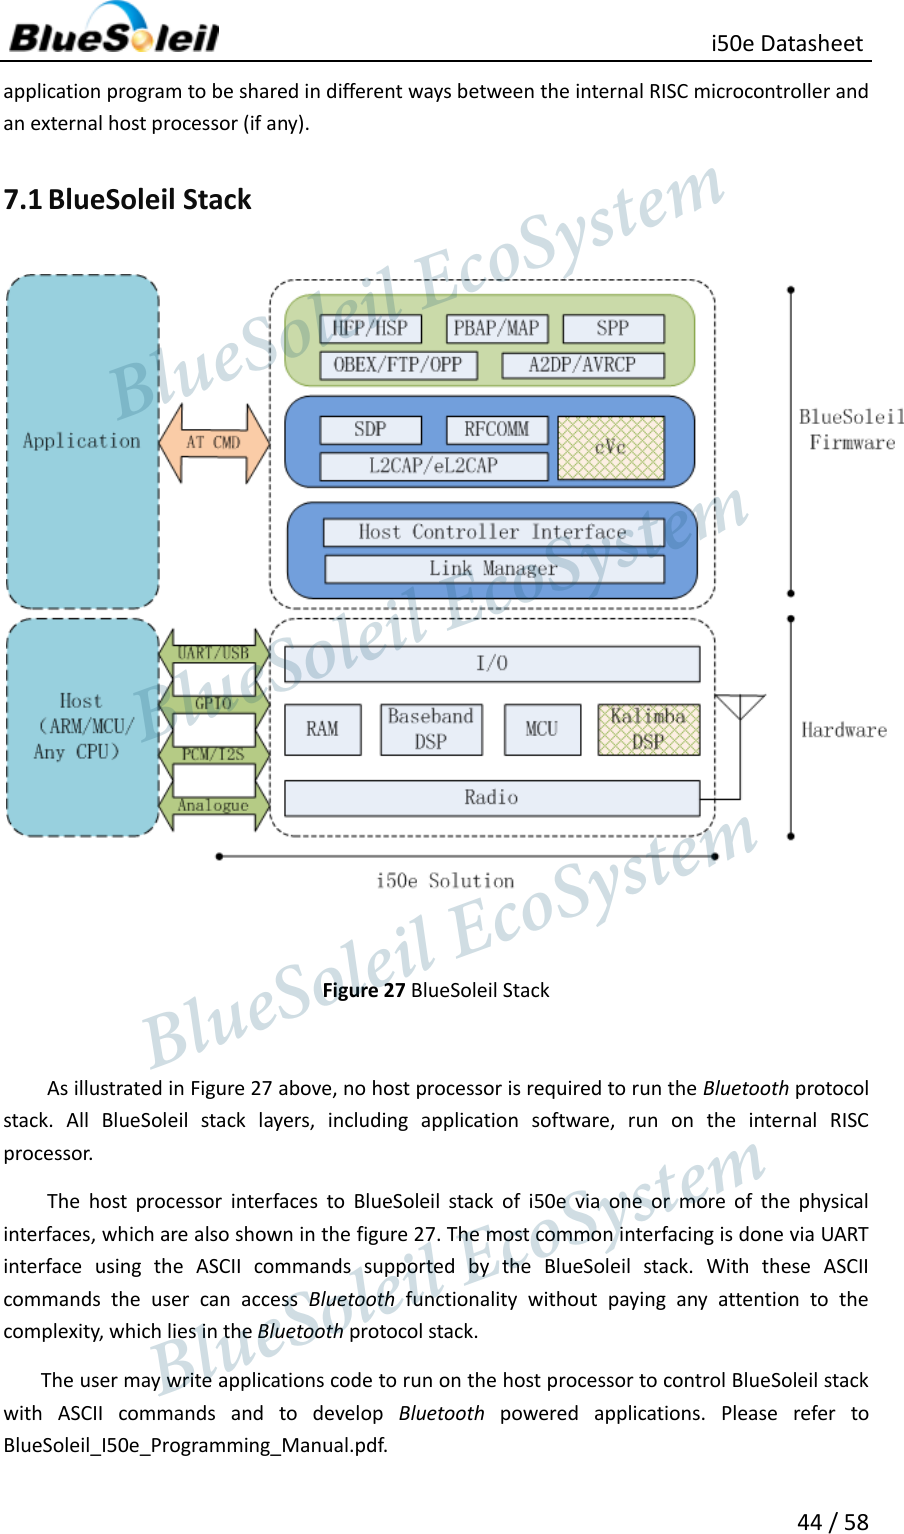                                                   i50e Datasheet 44 / 58 application program to be shared in different ways between the internal RISC microcontroller and an external host processor (if any).   7.1 BlueSoleil Stack   Figure 27 BlueSoleil Stack  As illustrated in Figure 27 above, no host processor is required to run the Bluetooth protocol stack.  All  BlueSoleil  stack  layers,  including  application  software,  run  on  the  internal  RISC processor.   The  host  processor  interfaces  to  BlueSoleil  stack  of  i50e  via  one  or  more  of  the  physical interfaces, which are also shown in the figure 27. The most common interfacing is done via UART interface  using  the  ASCII  commands  supported  by  the  BlueSoleil  stack.  With  these  ASCII commands  the  user  can  access  Bluetooth  functionality  without  paying  any  attention  to  the complexity, which lies in the Bluetooth protocol stack.     The user may write applications code to run on the host processor to control BlueSoleil stack with  ASCII  commands  and  to  develop  Bluetooth  powered  applications.  Please  refer  to BlueSoleil_I50e_Programming_Manual.pdf.                  BlueSoleil EcoSystem            BlueSoleil EcoSystem      BlueSoleil EcoSystemBlueSoleil EcoSystem